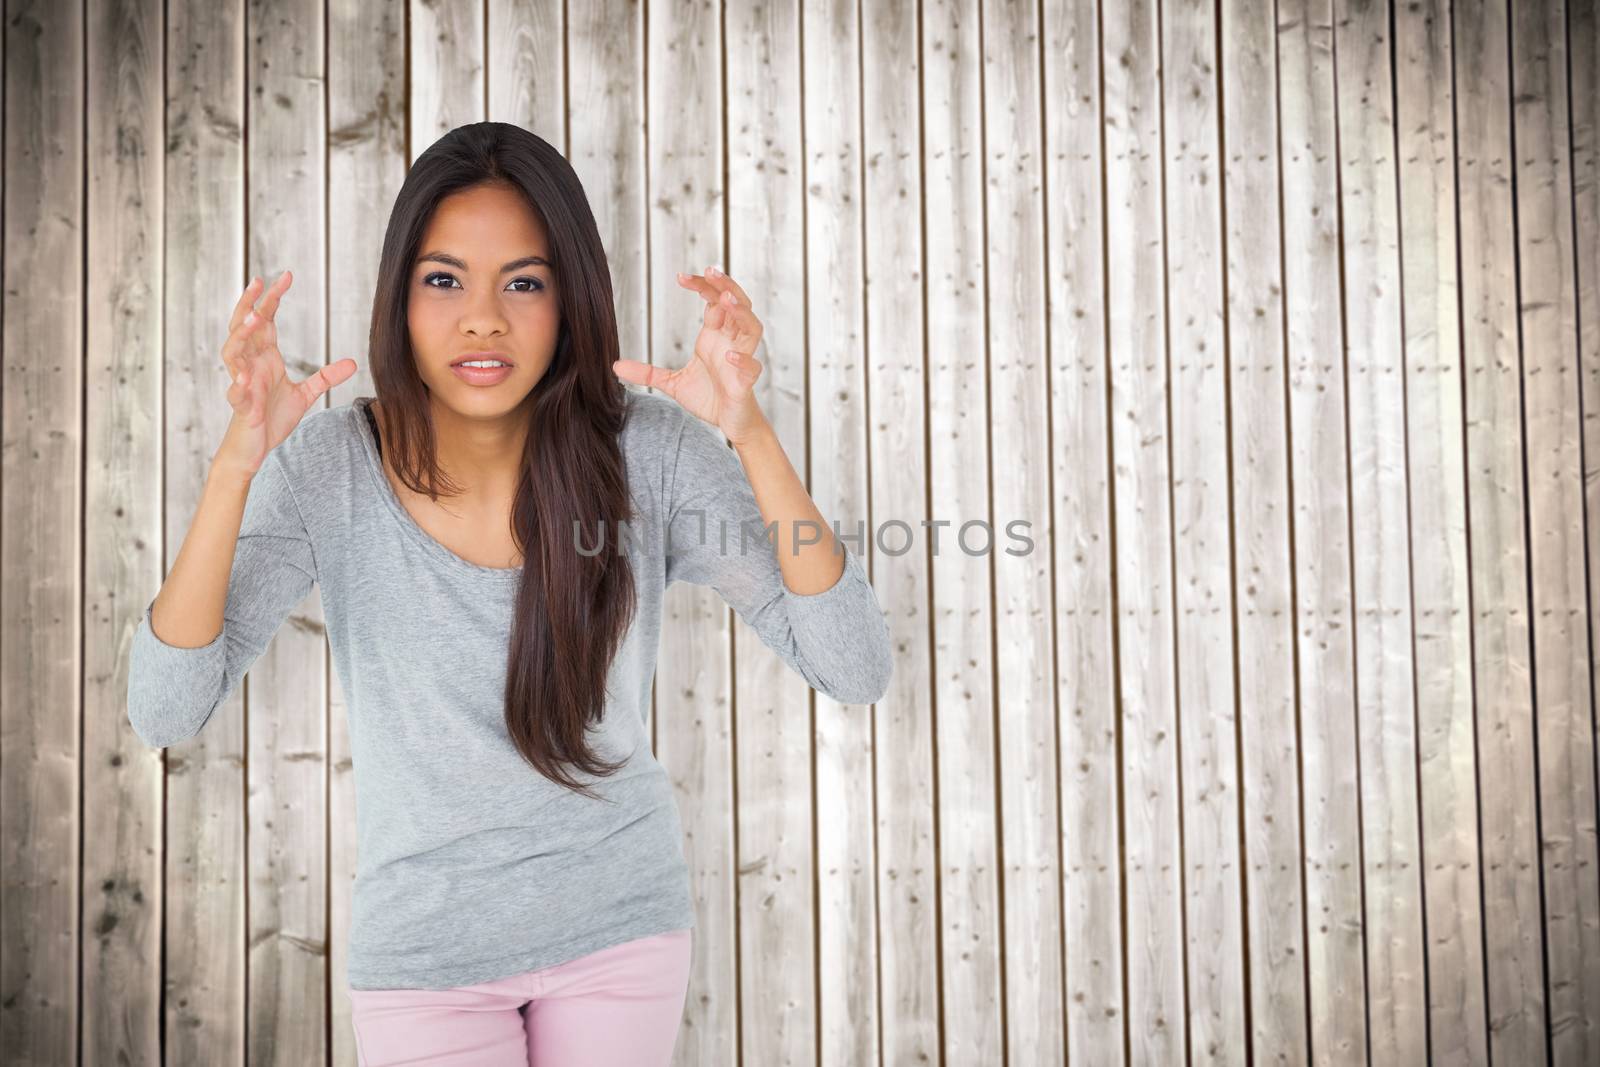 Angry brunette gesturing against wooden planks background